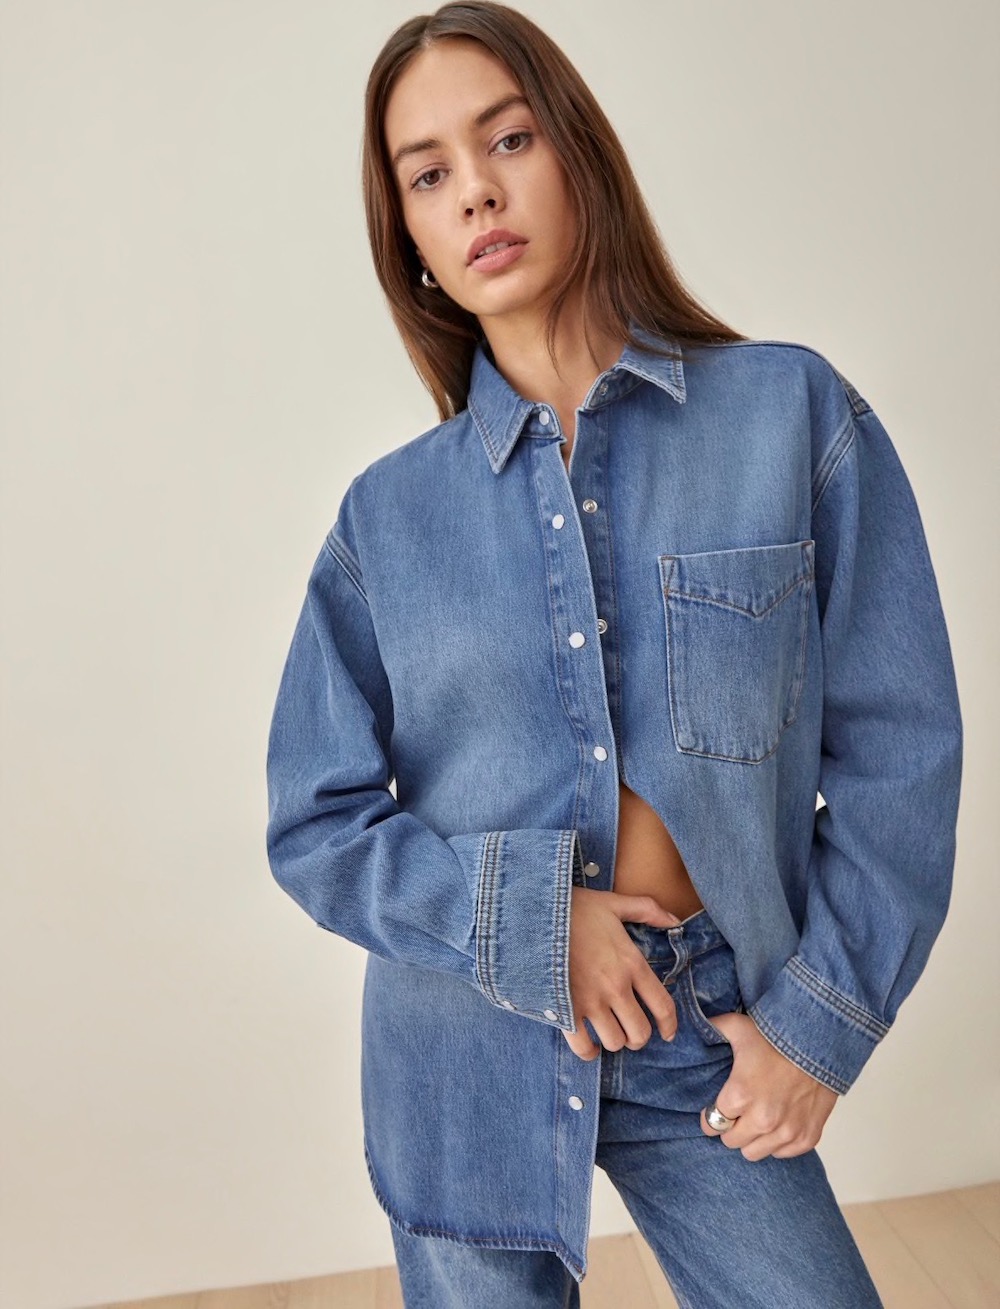 Denim Shirts to Wear From Now On - theFashionSpot